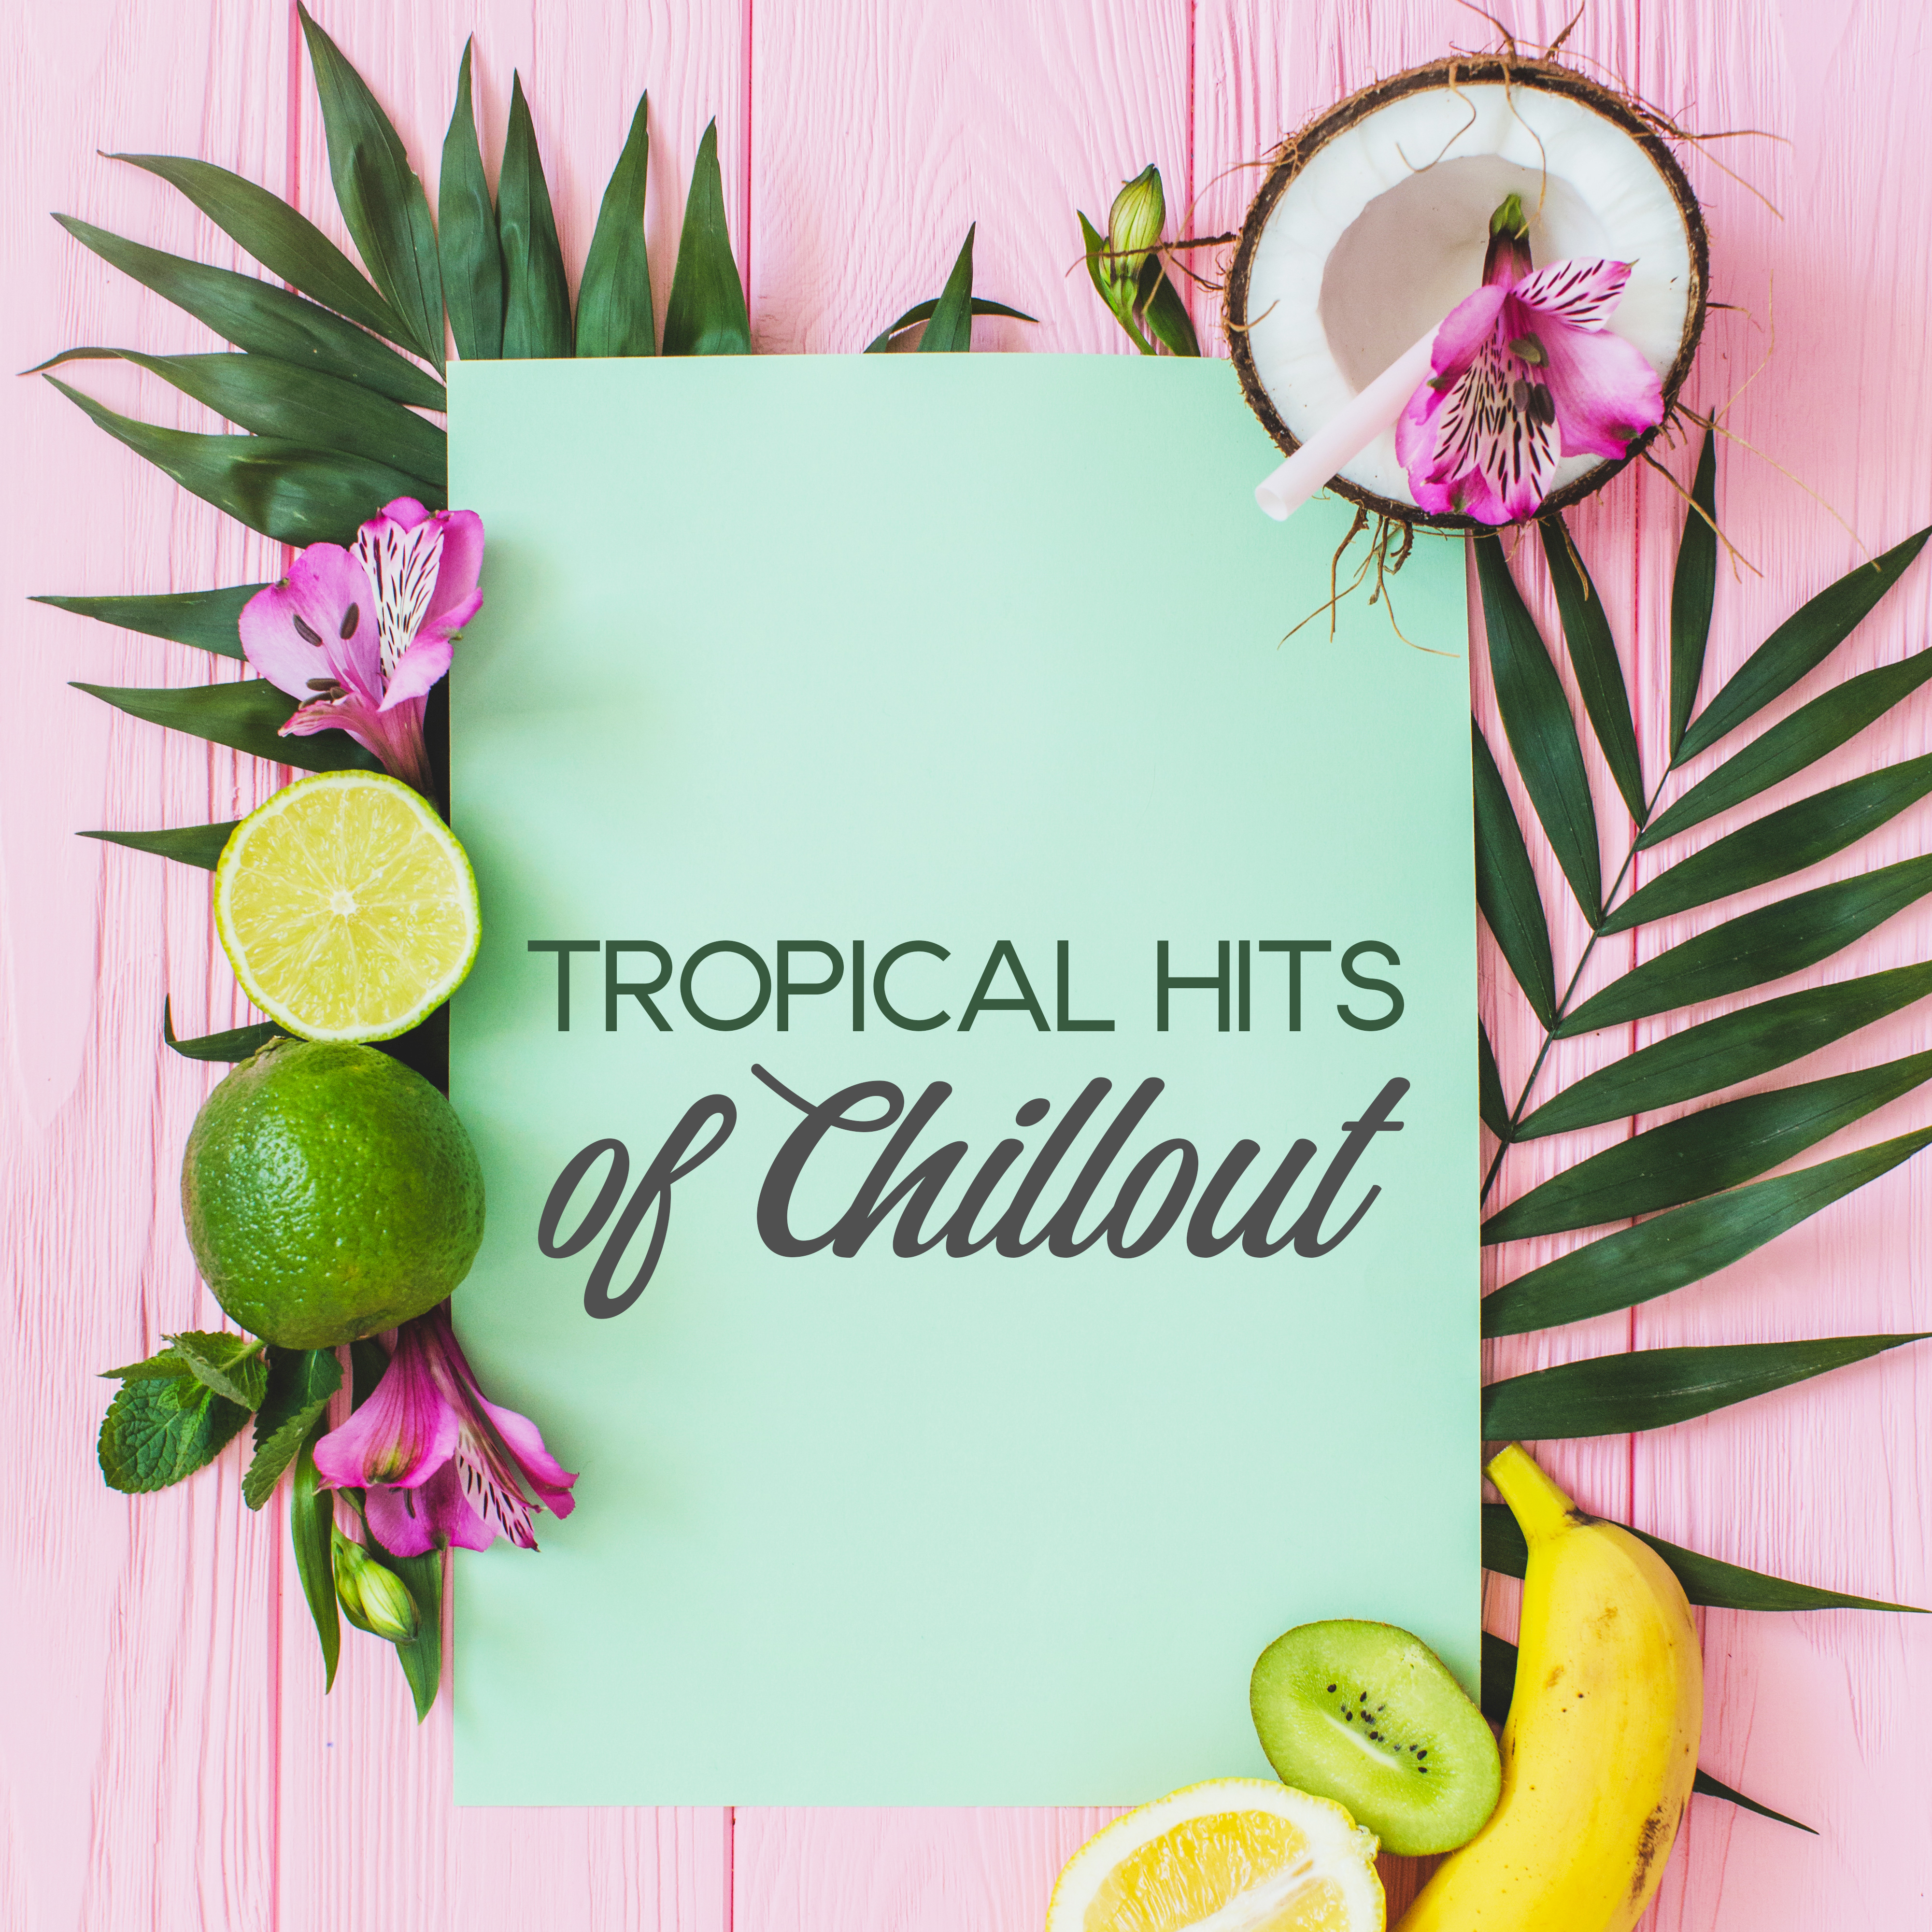 Tropical Hits of Chillout